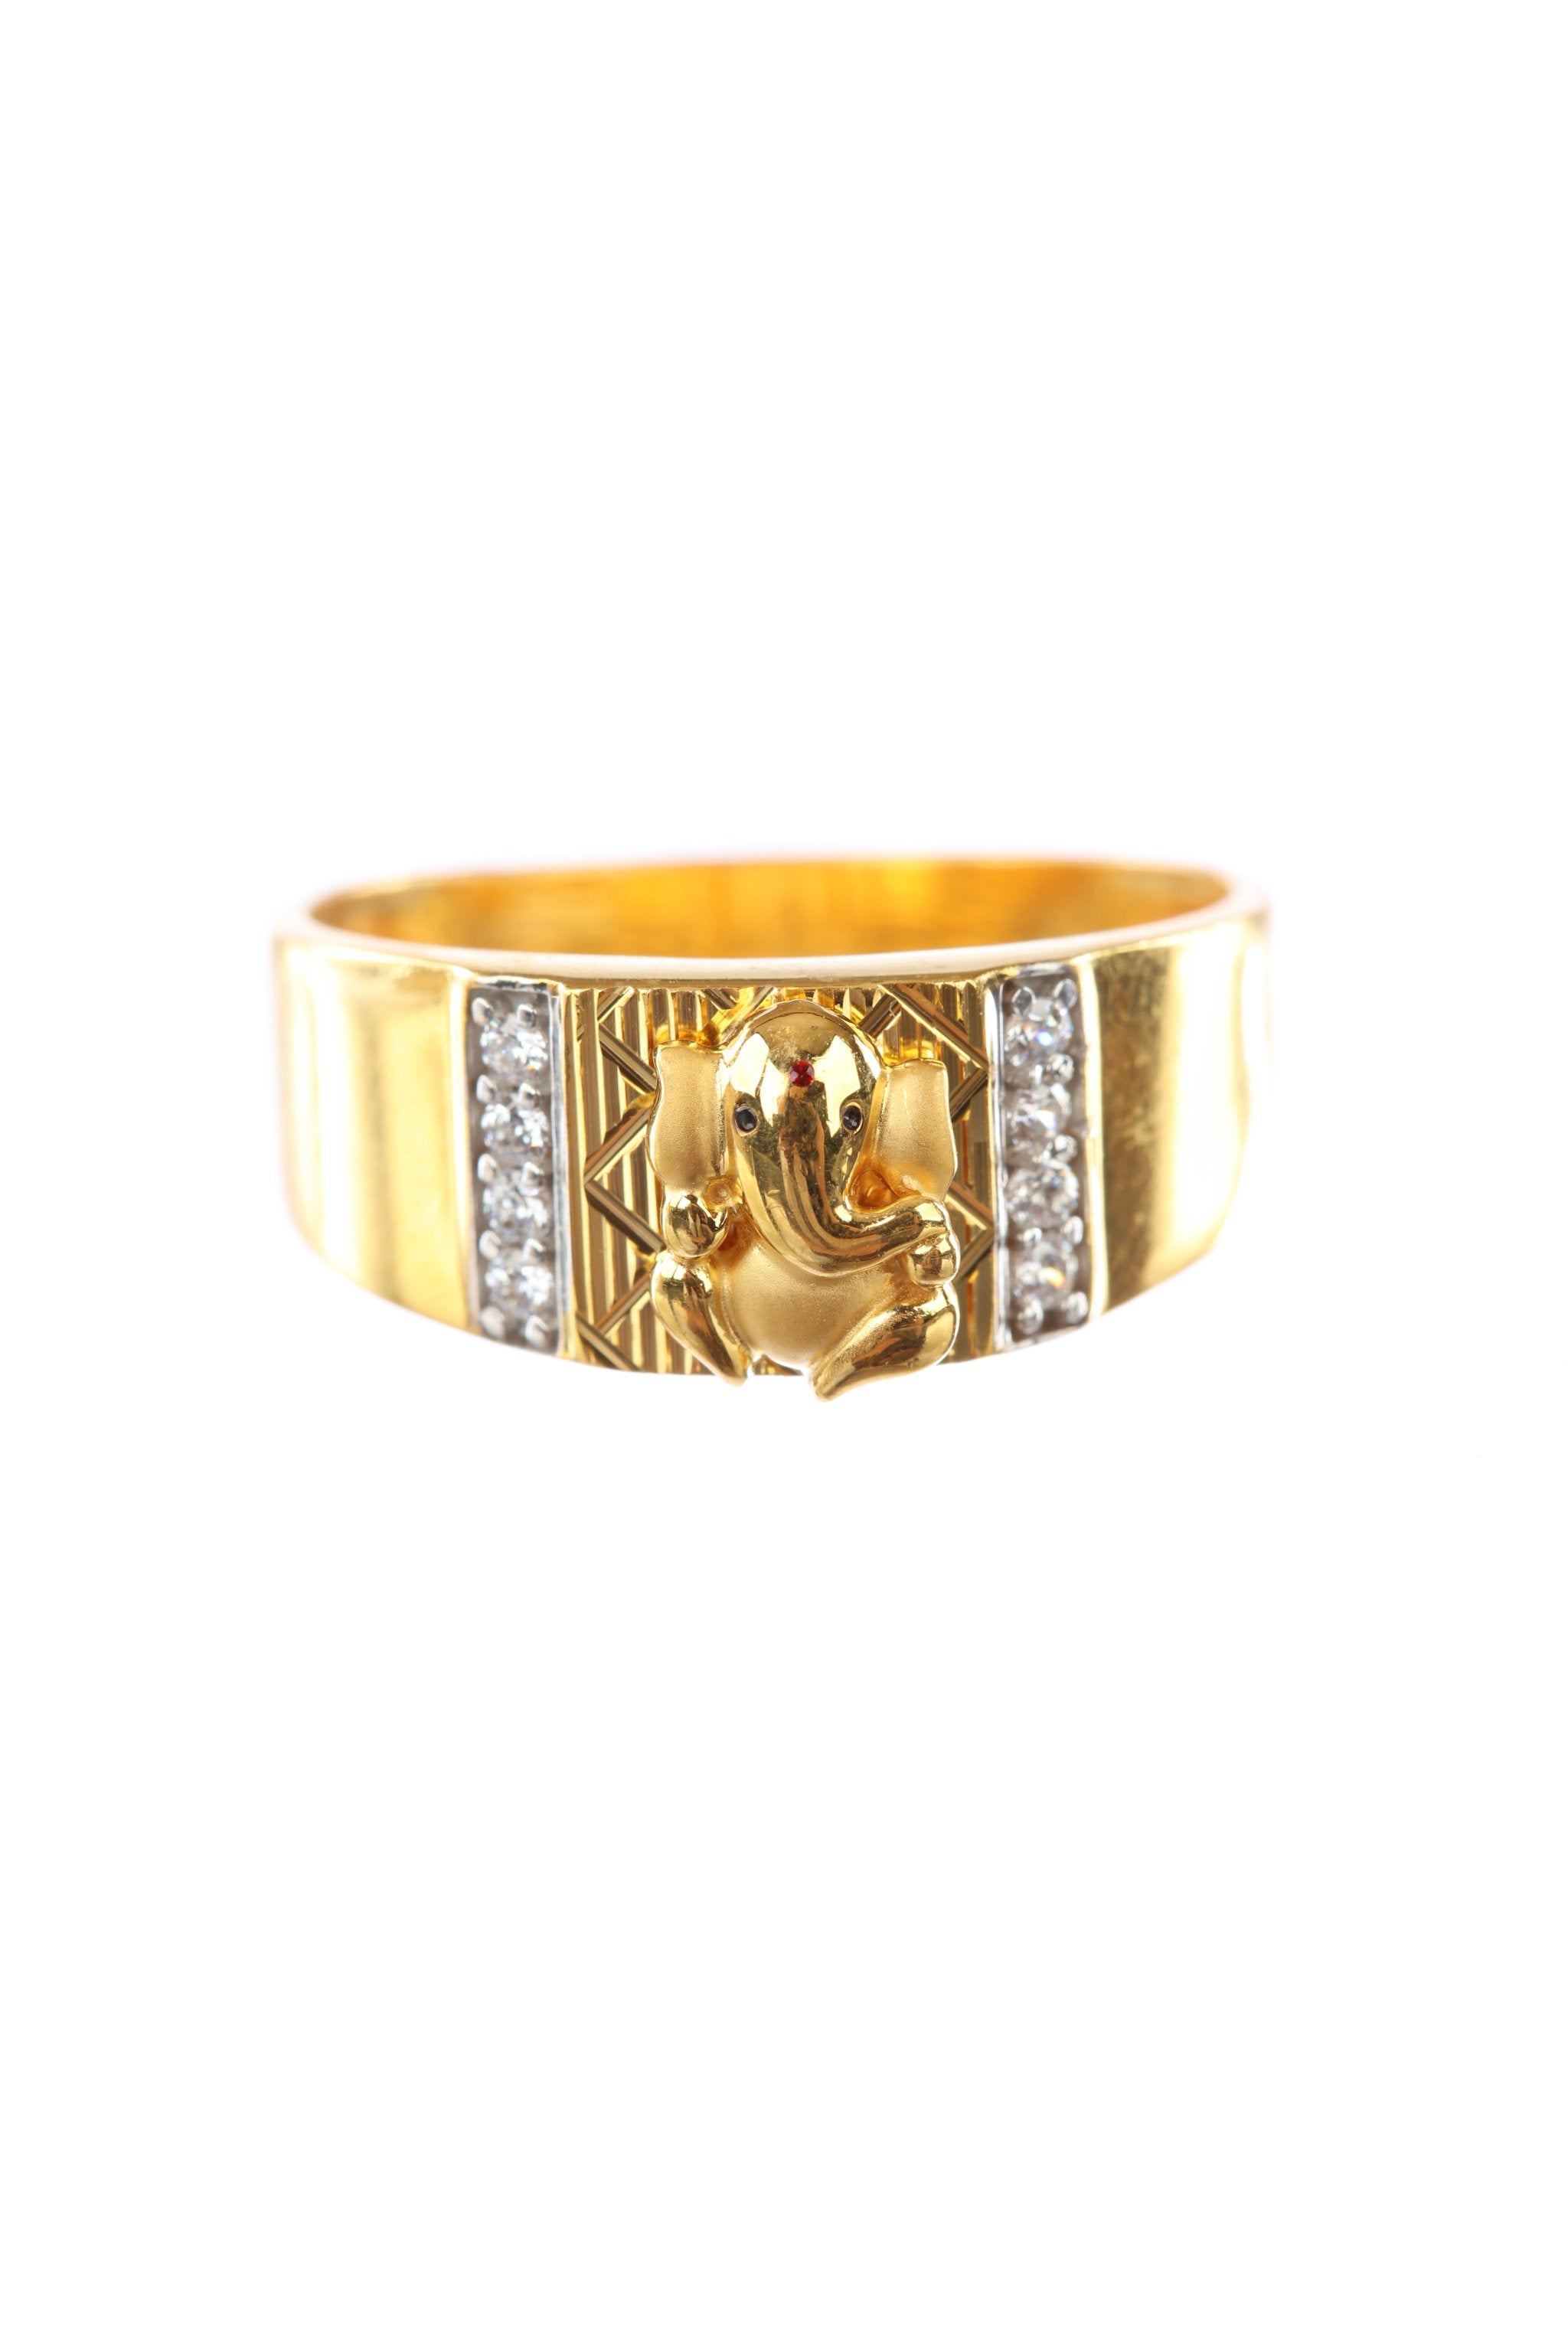 Gold Fancy LORD GANESHA GOLD RING 22k purity,weight-3.800gm Approx (genuine  size) – Asdelo